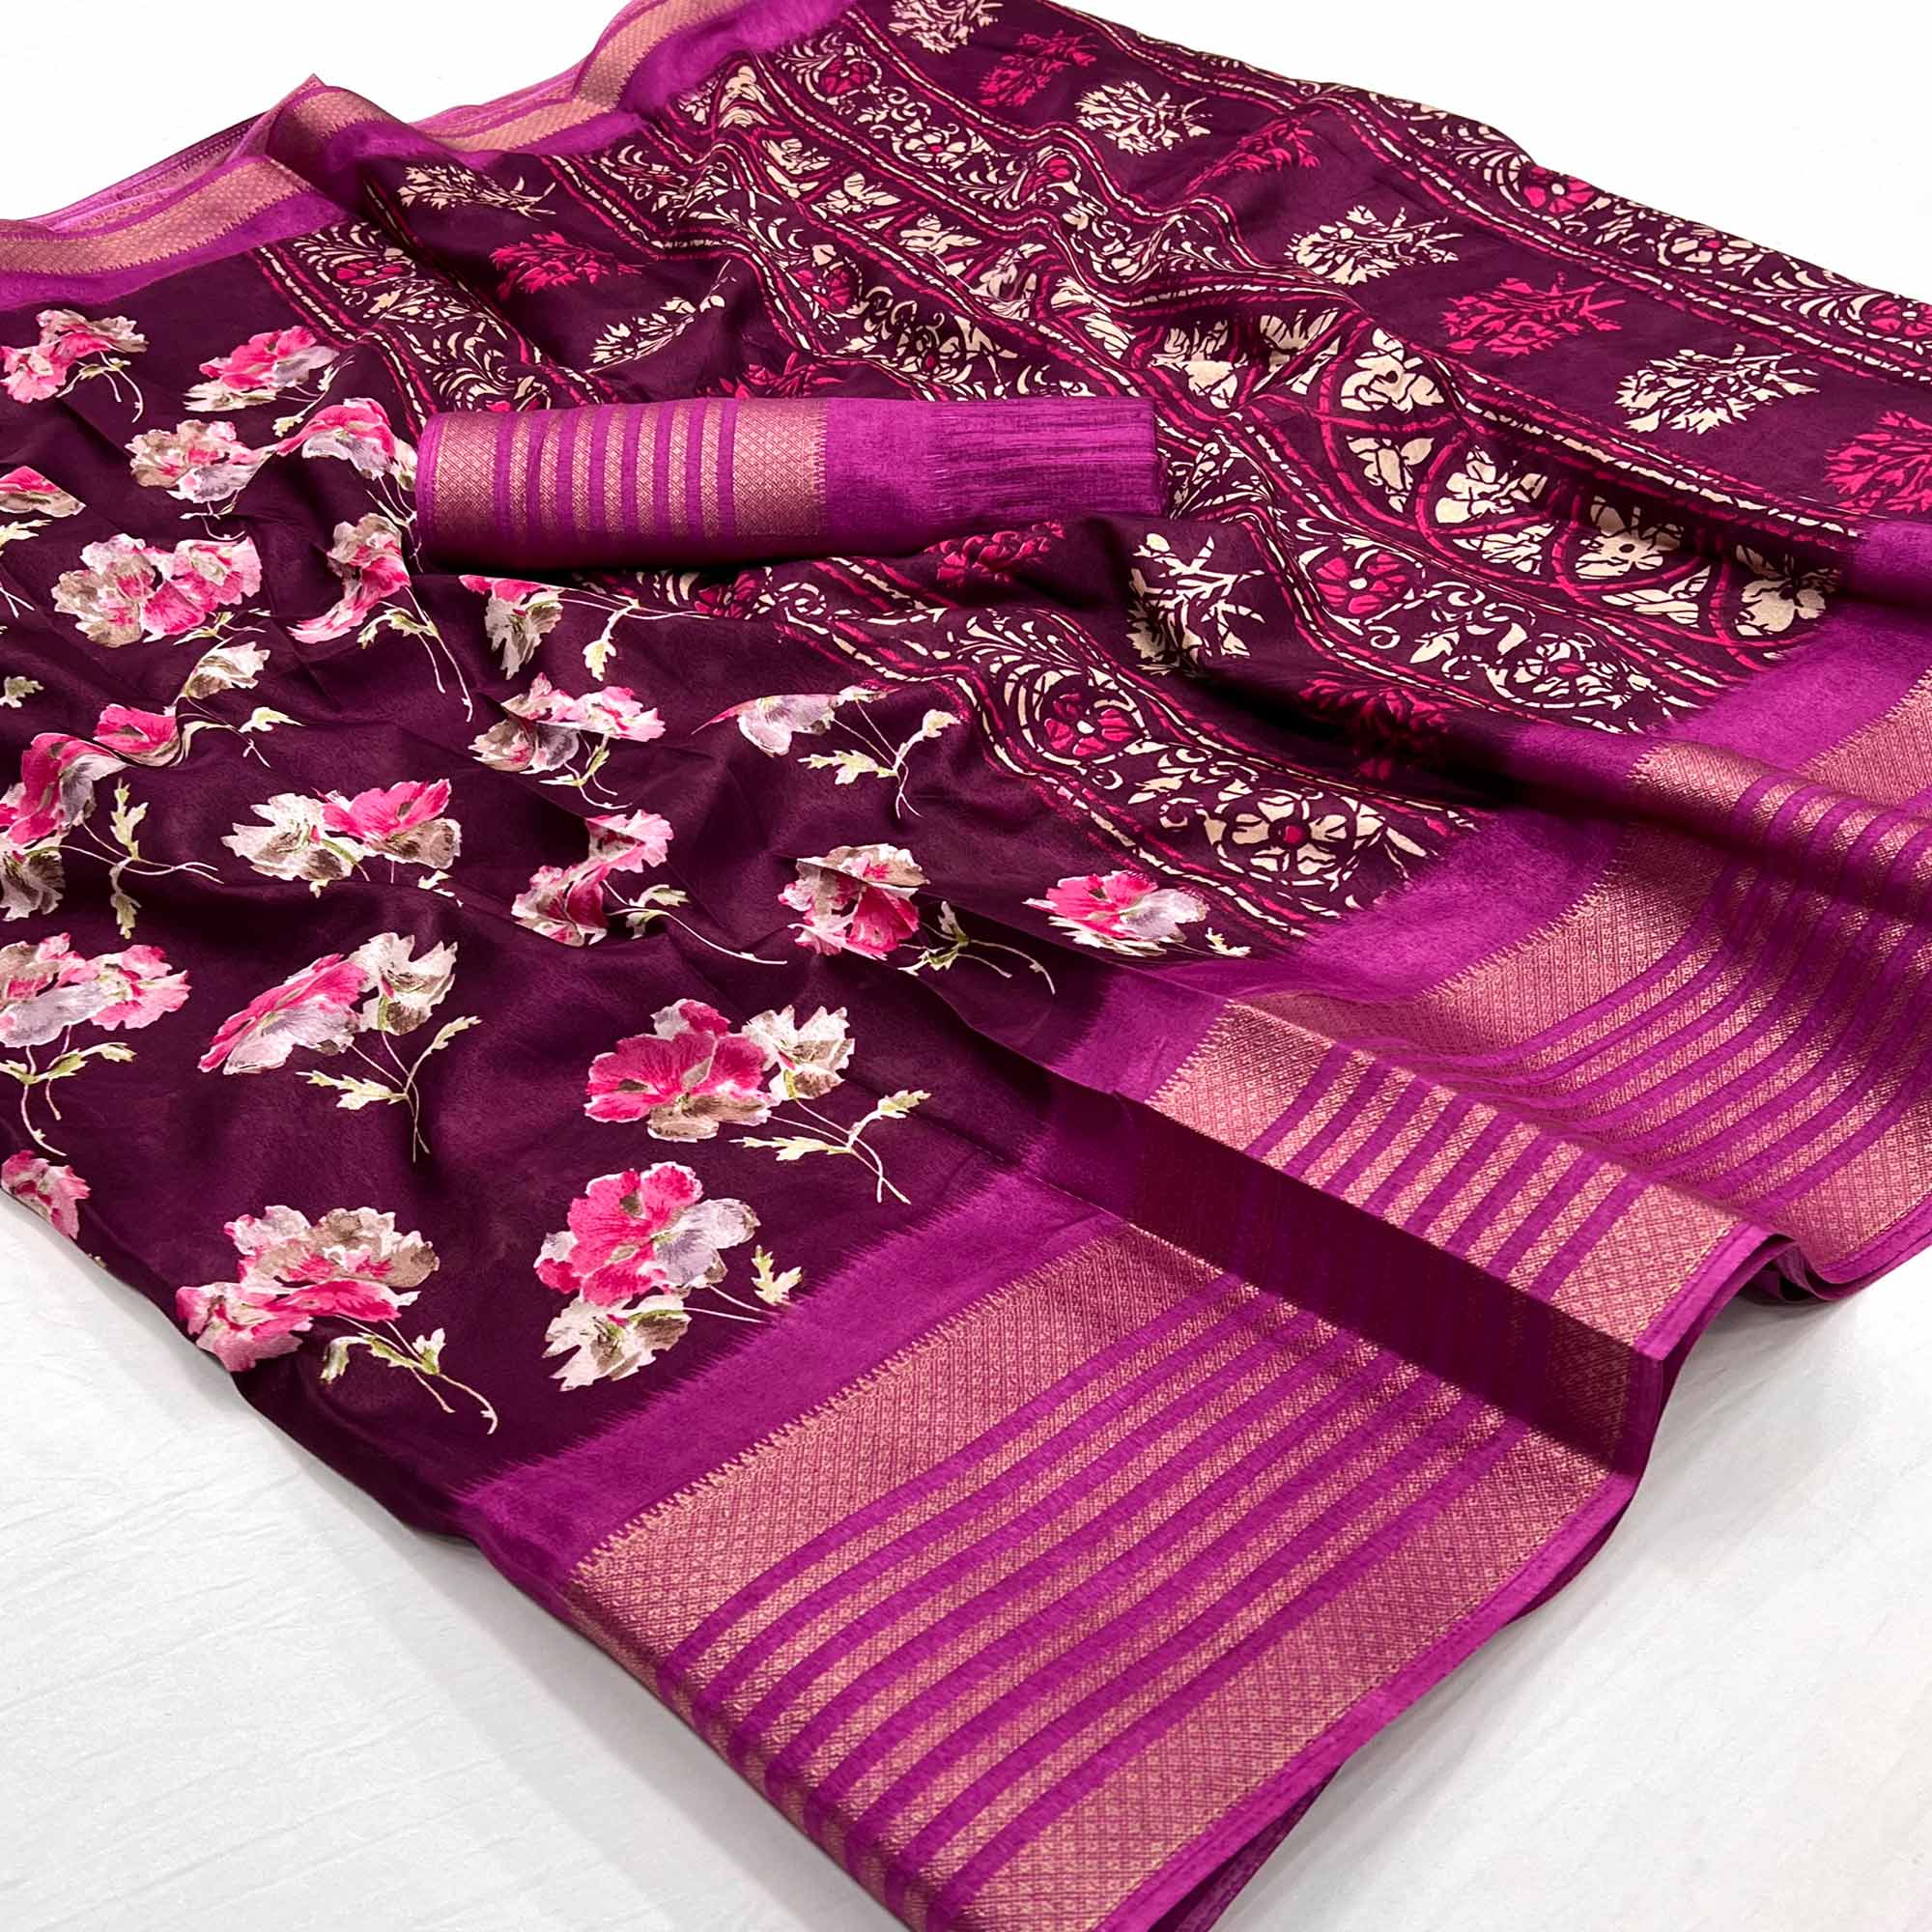 Wine Floral Printed Dola Silk Saree With Woven Border